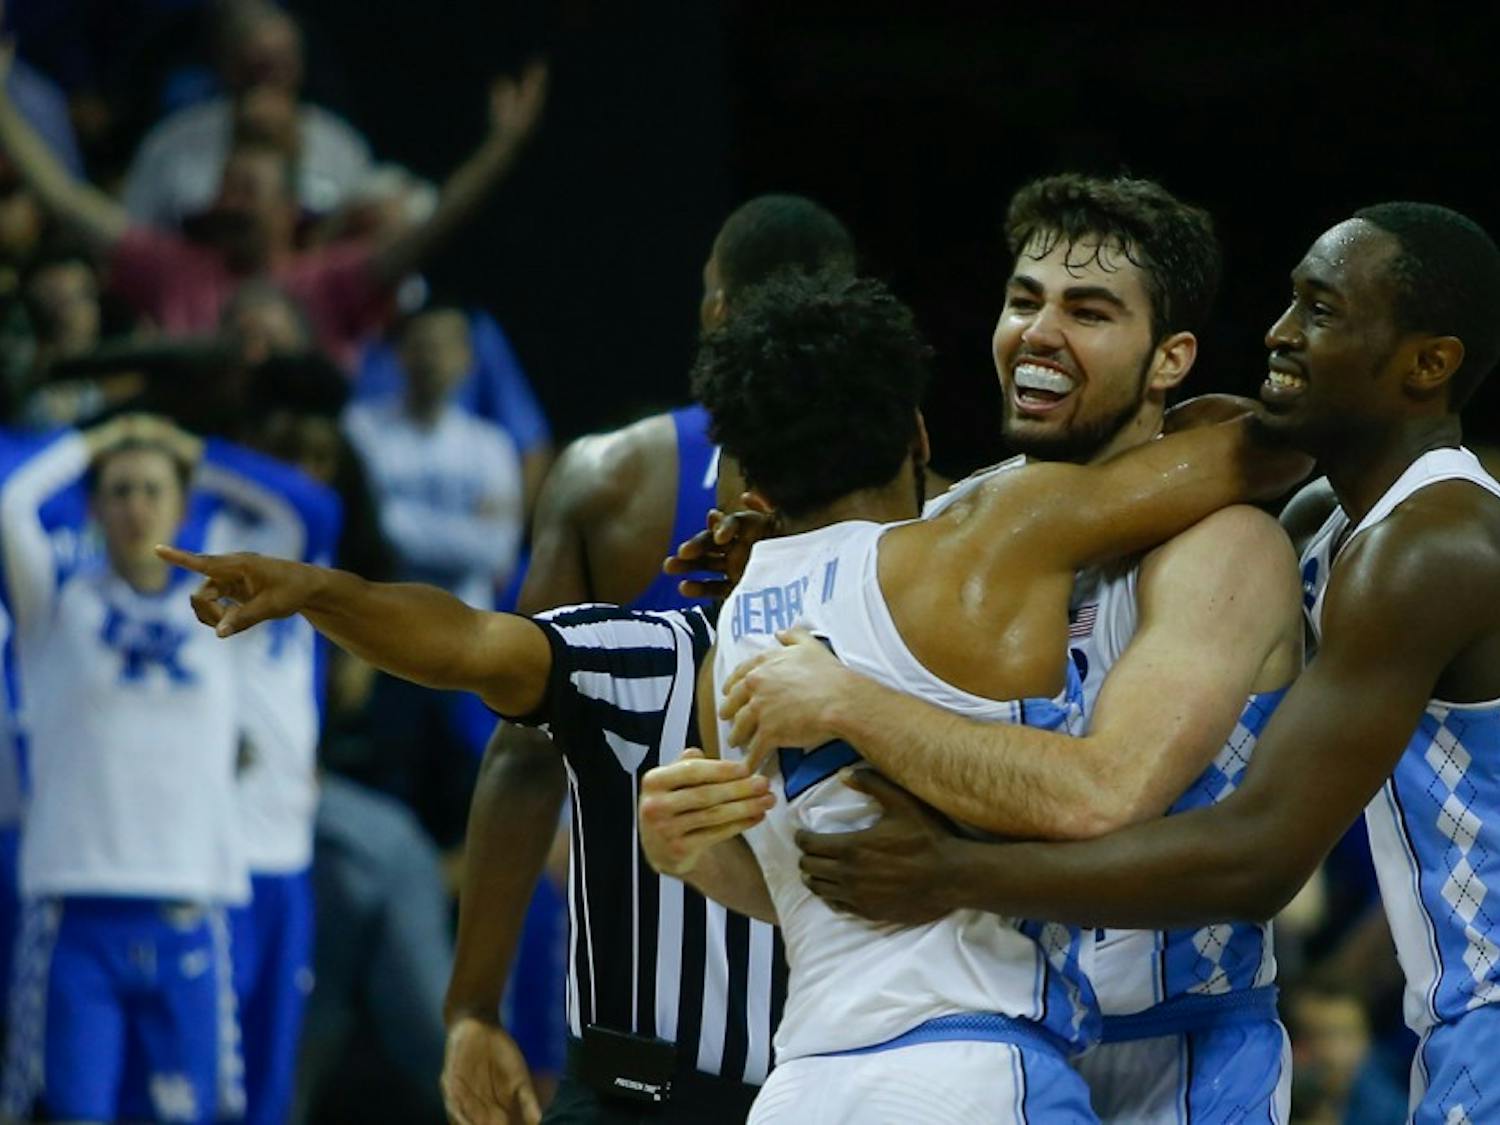 The North Carolina men's basketball team defeated Kentucky 75-73 in their Elite Eight matchup in Memphis on Sunday. Forward Luke Maye (32) hit a game winning shot to give the Tar Heels a two-point lead with 0.3 seconds remaining. The team will travel to Phoenix and face the Oregon Ducks in the Final Four on Saturday.